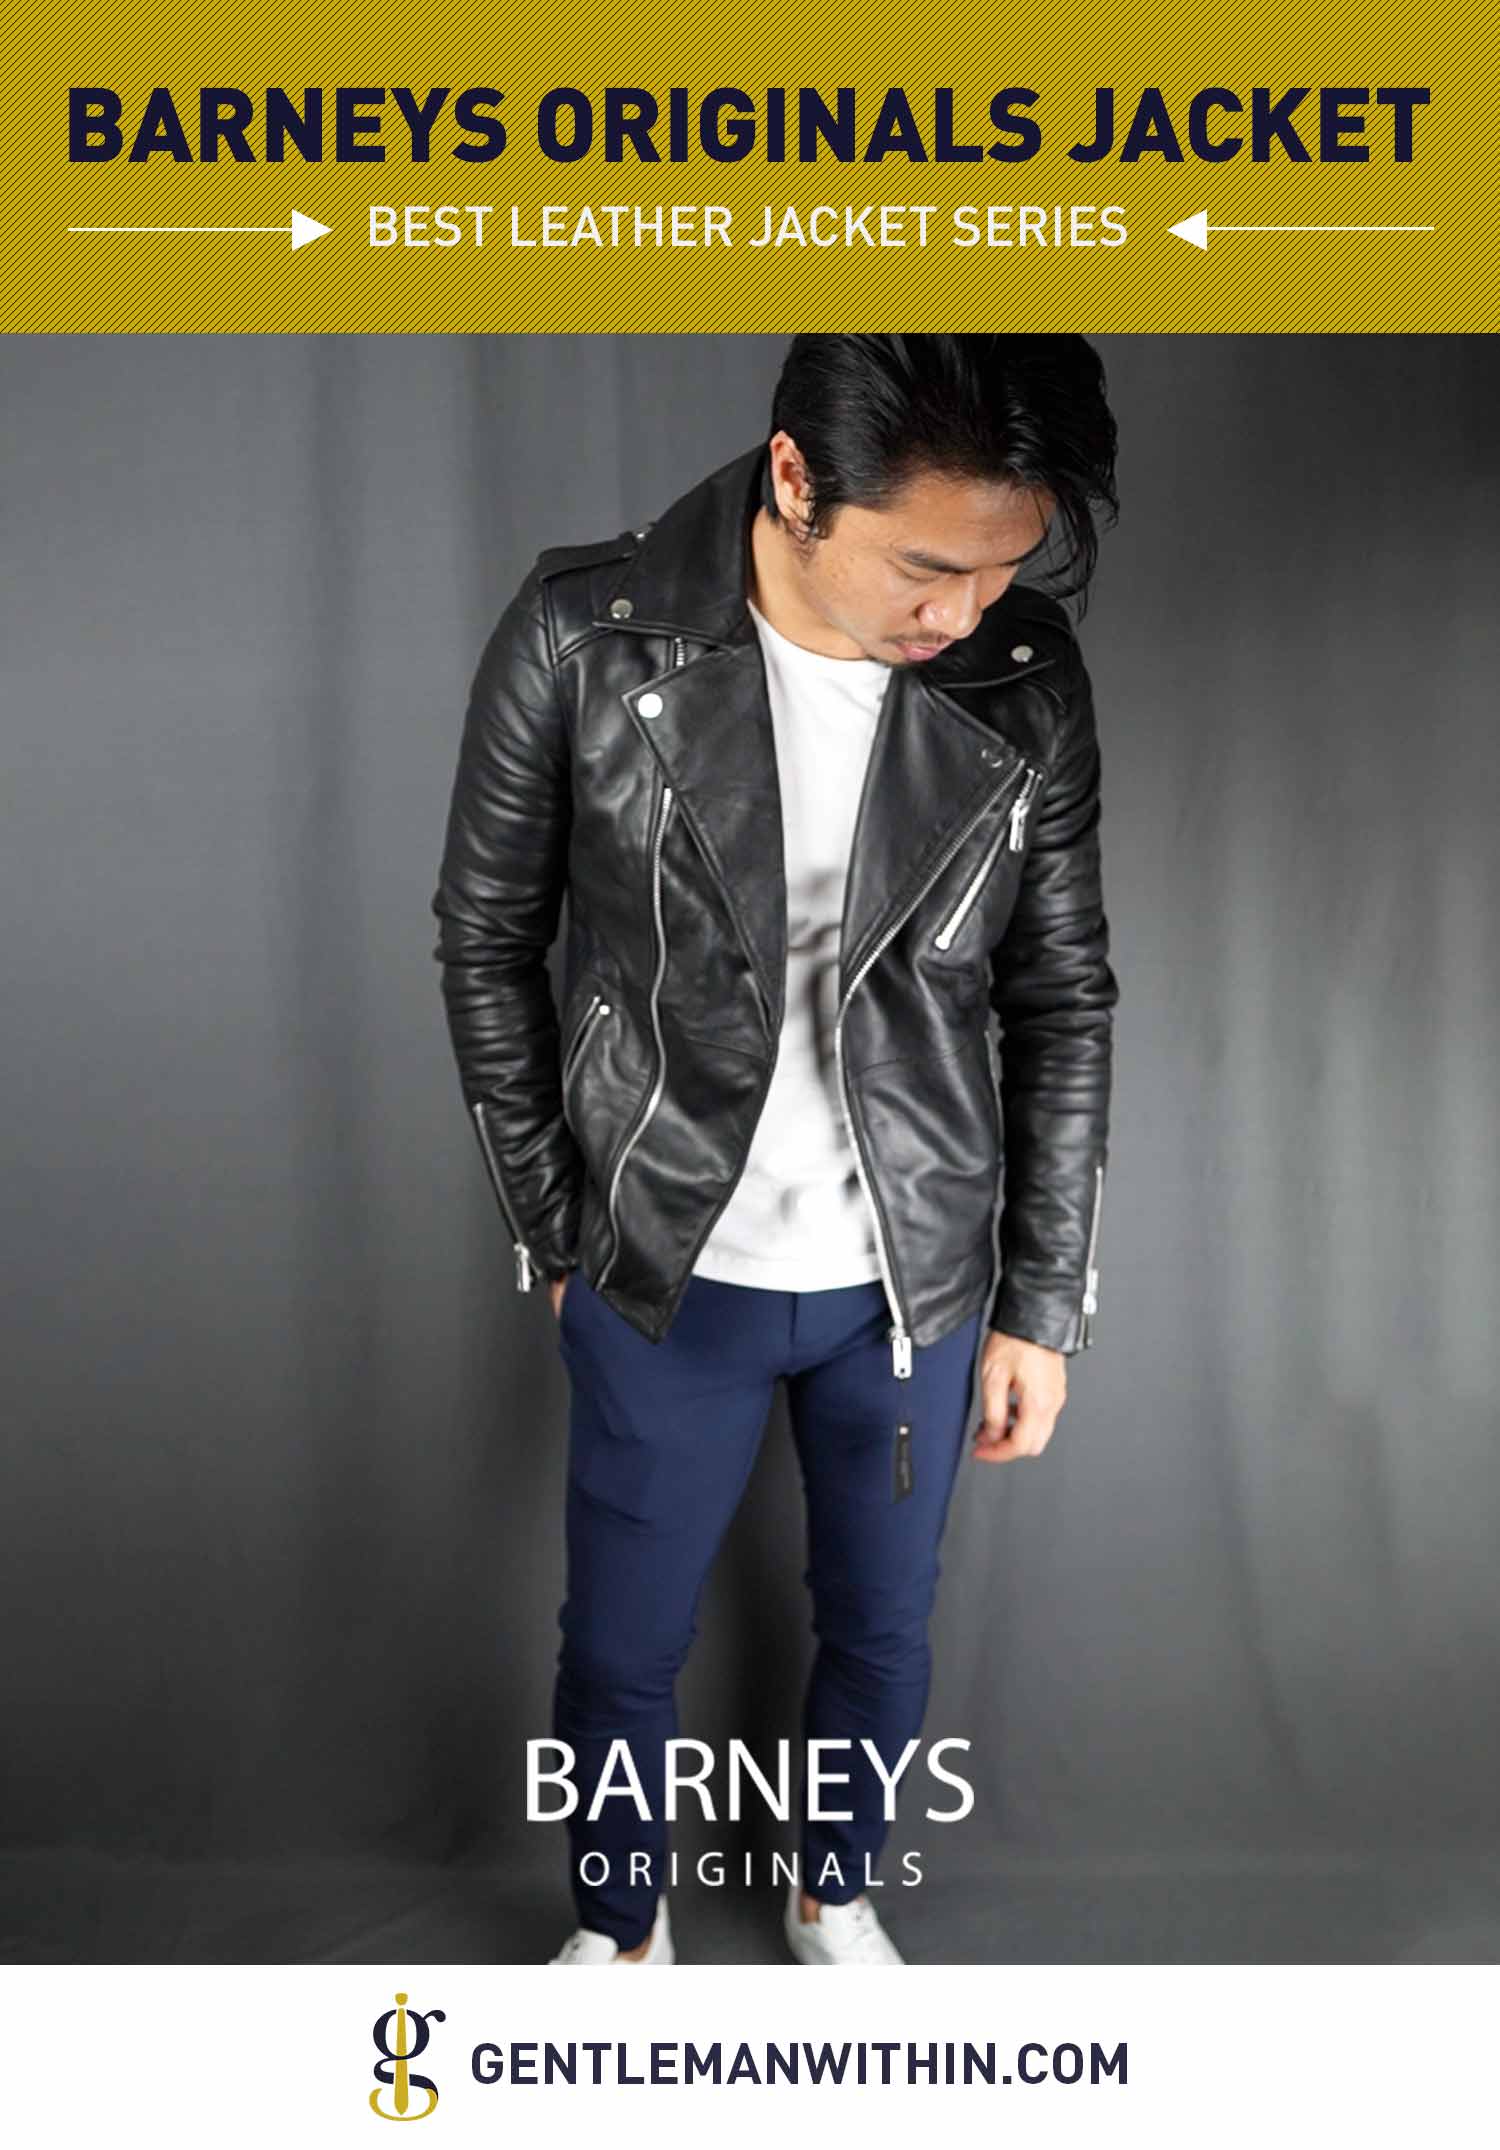 ASOS Barneys Leather Jacket Review (Best Leather Jacket Series) | GENTLEMAN WITHIN